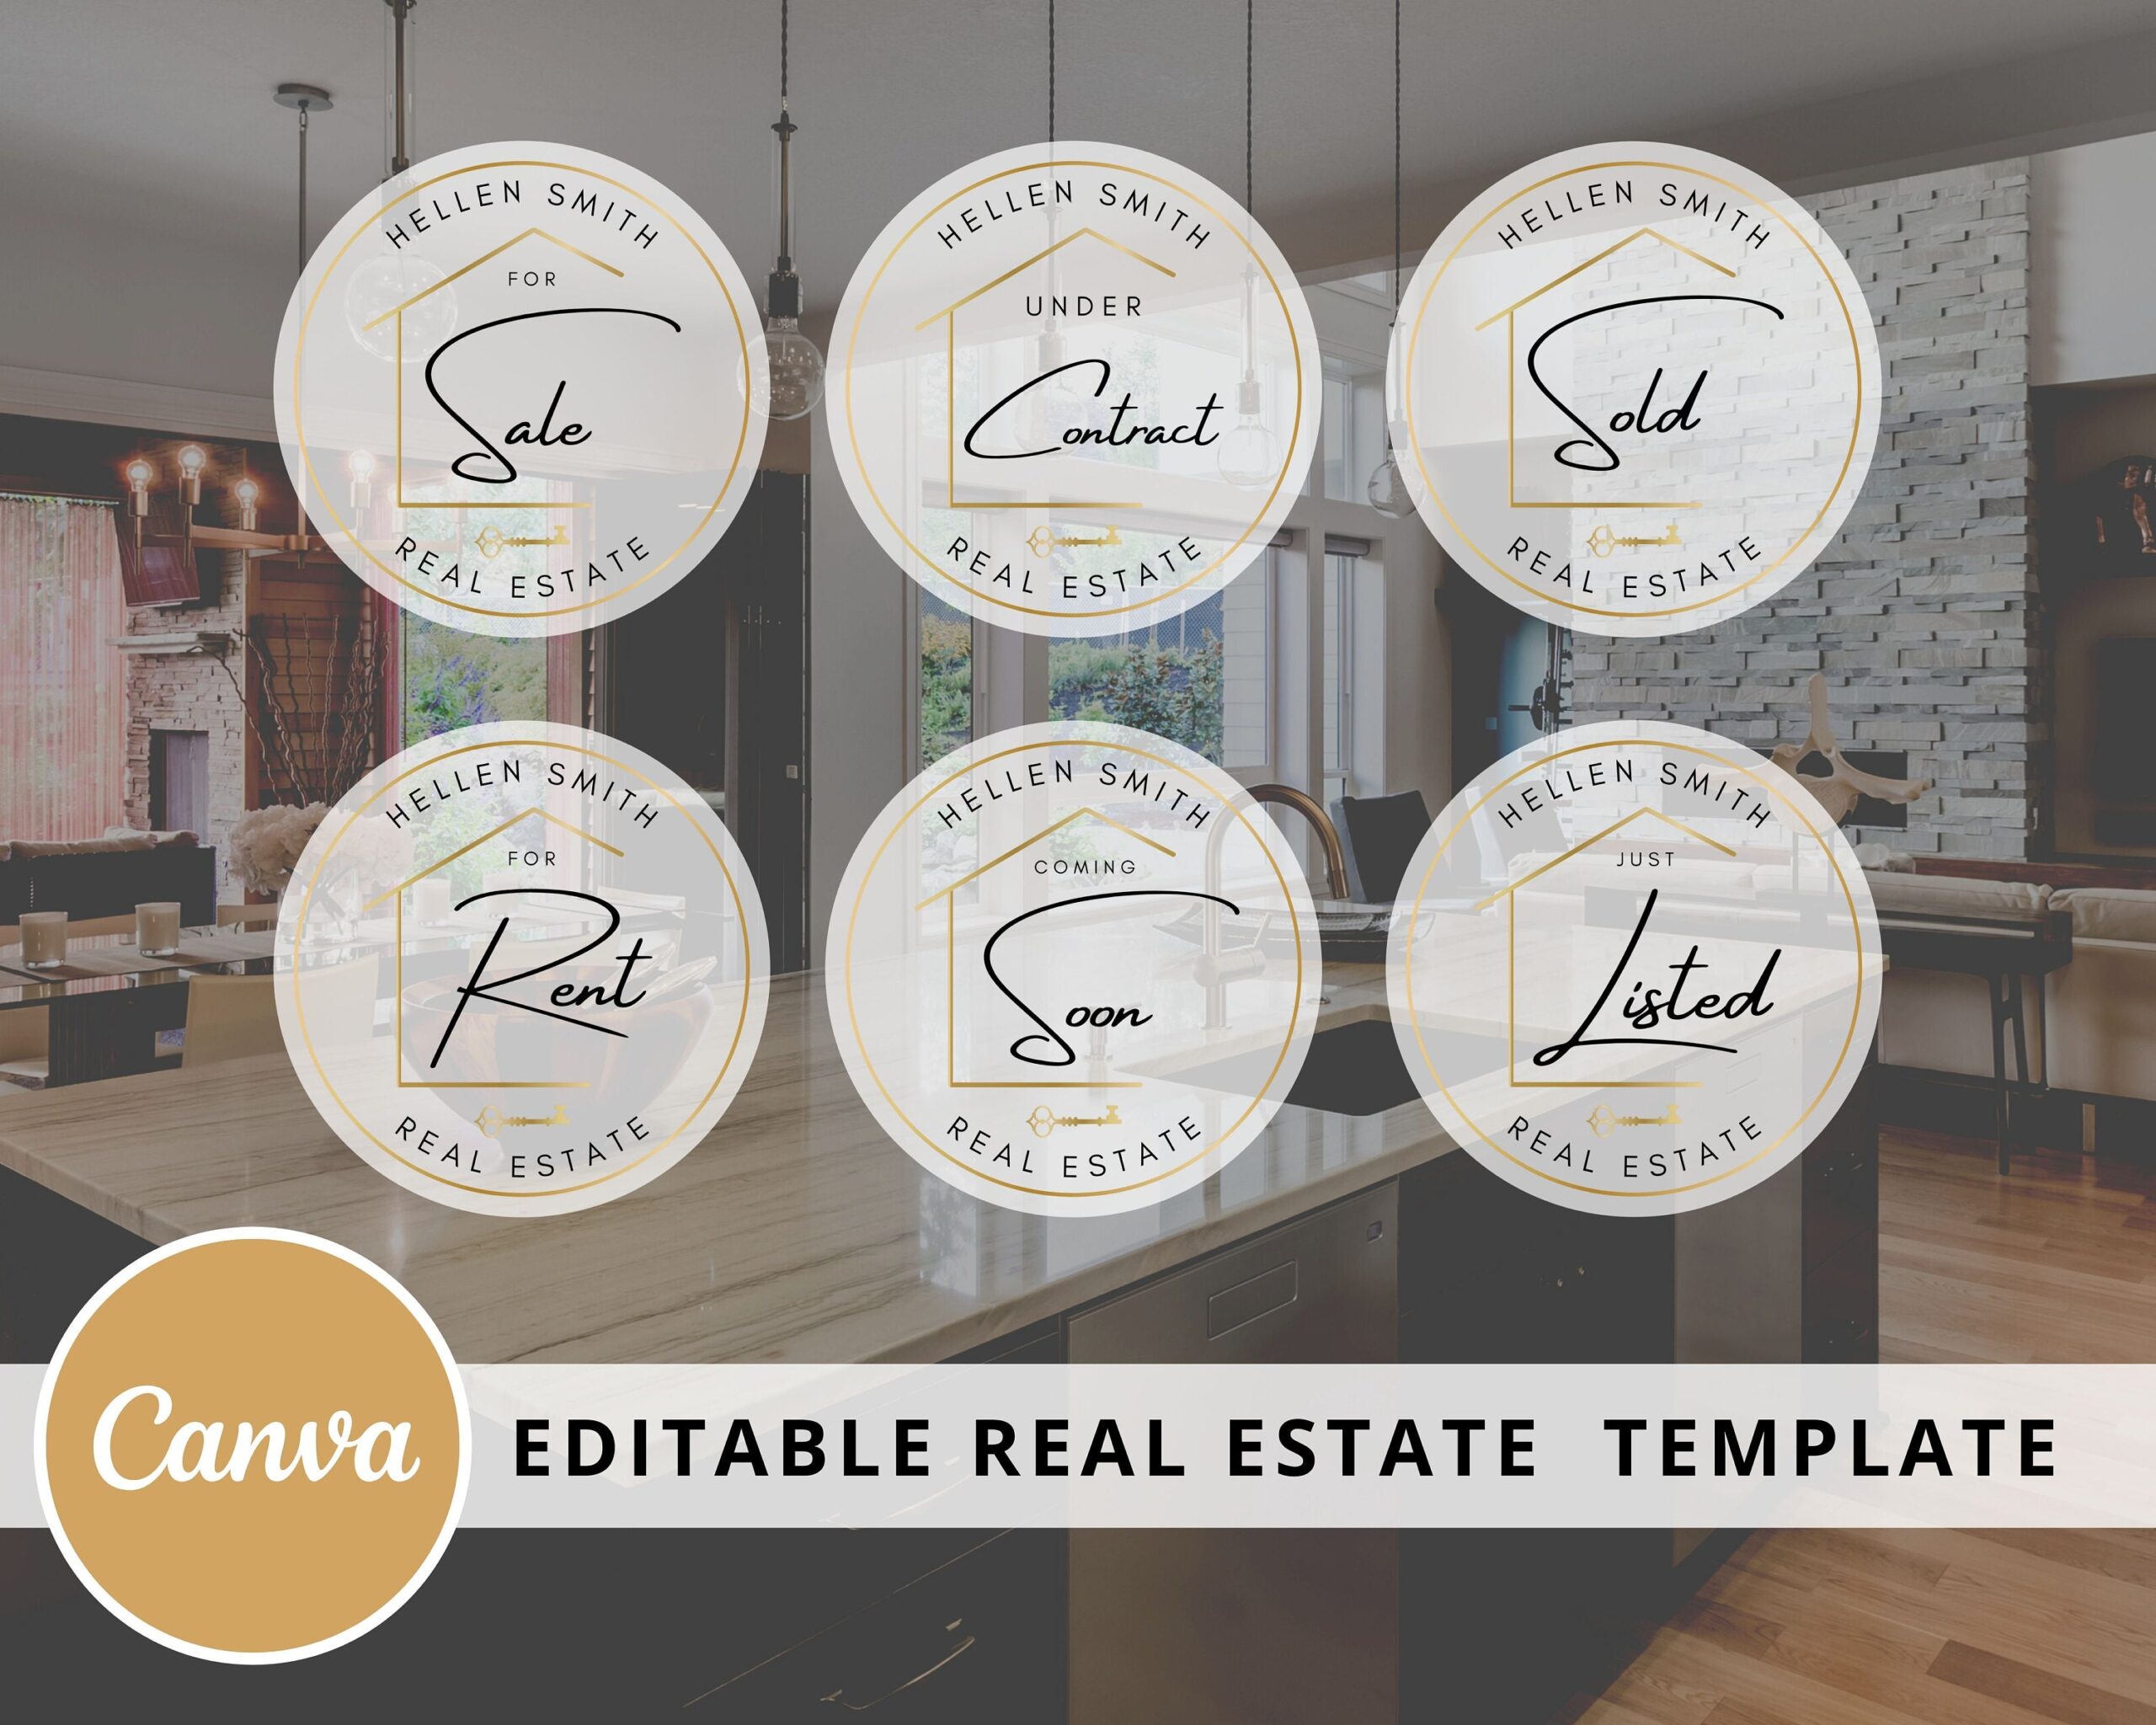 DIY Real Estate Watermark Badges -  Stamps - Editable Canva Template - IG Highlights -  Stamps - Sold -  Open House -  Coming Soon -  etc.